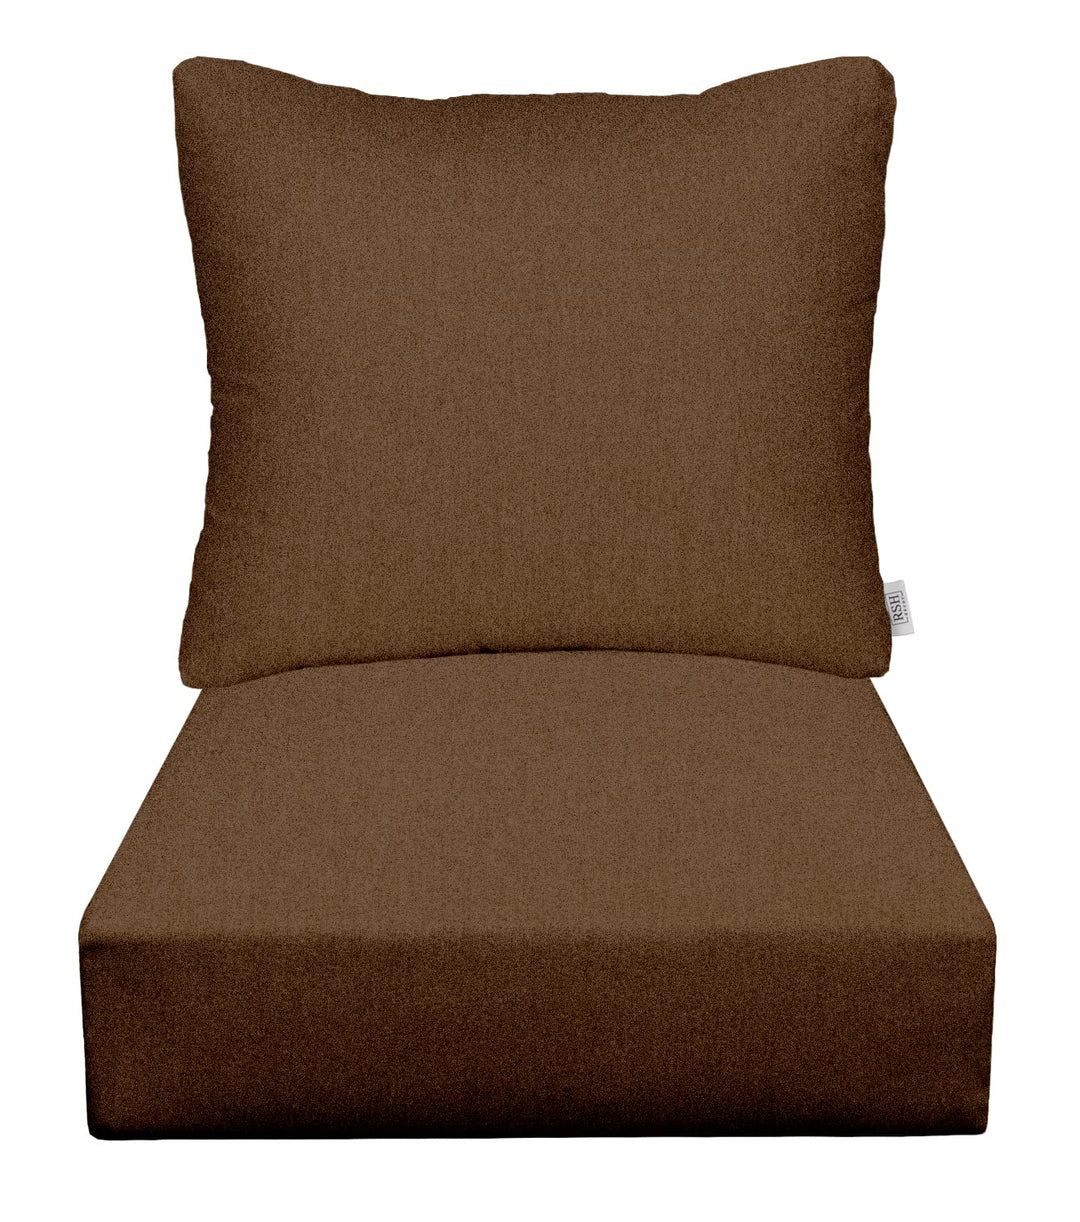 Deep Seating Pillow Back Chair Cushion Set, 24" x 27" x 5" Seat and 25" x 21" Back, Sunbrella Solids